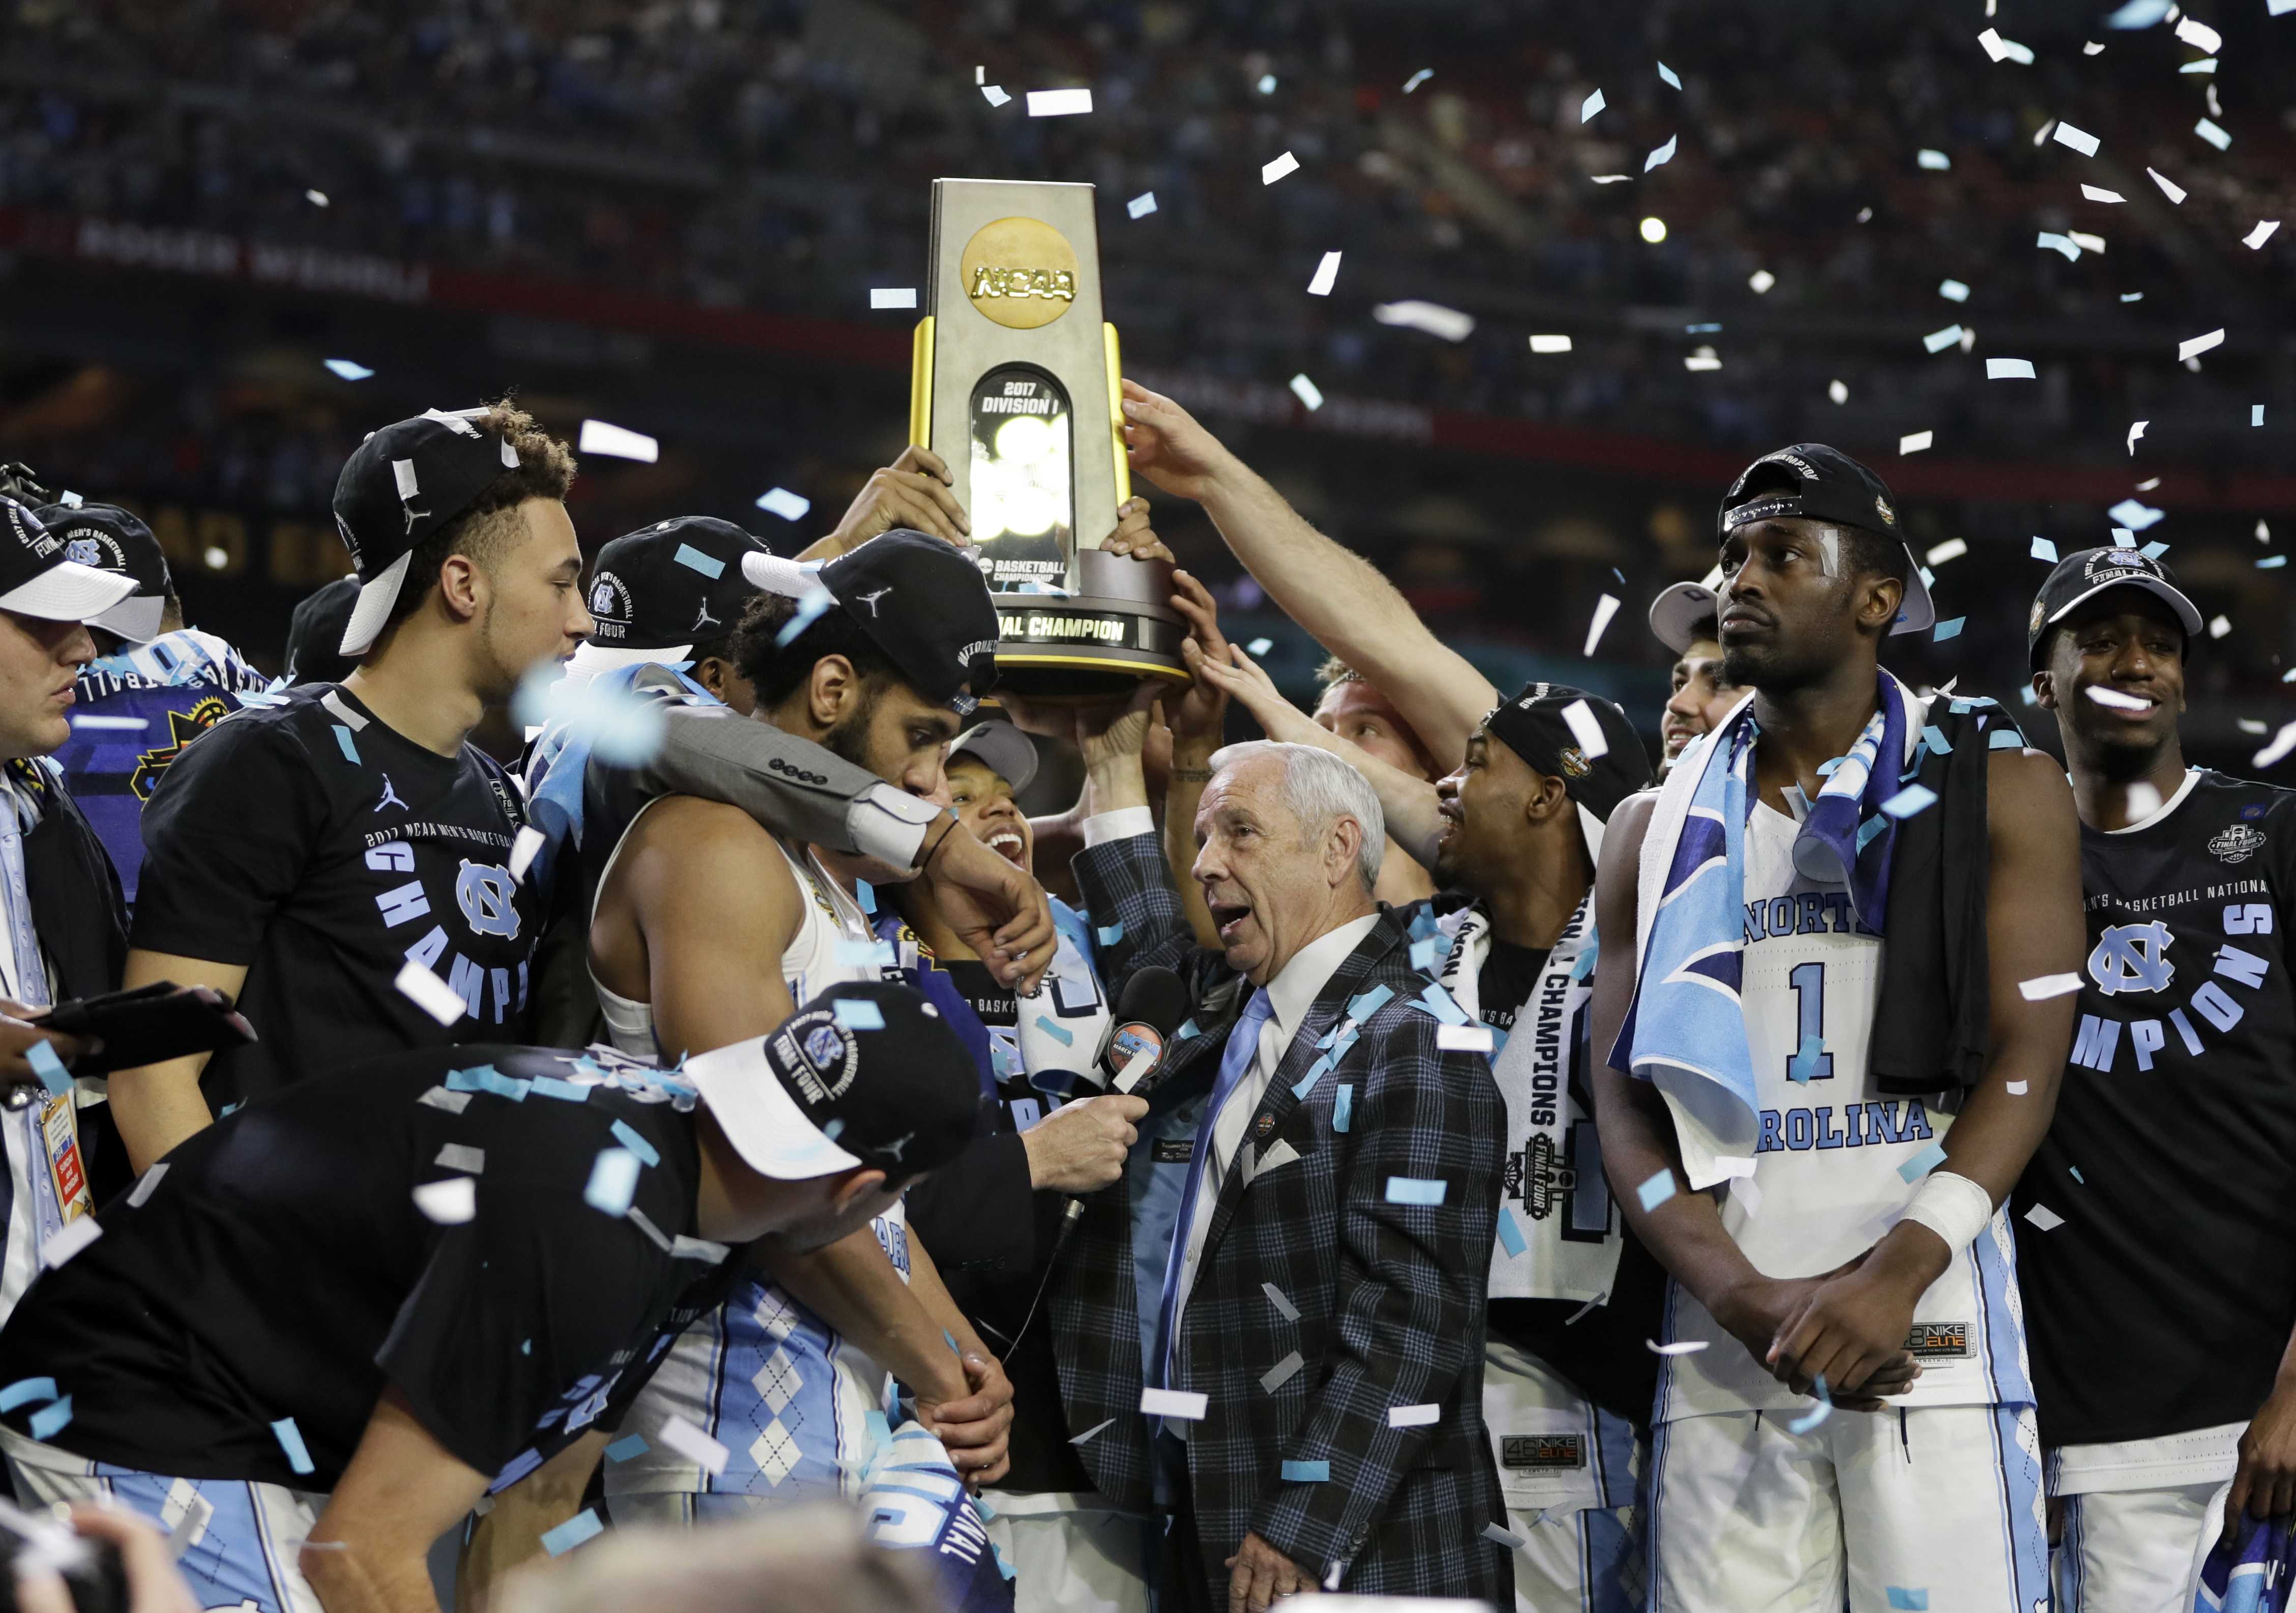 UNC coach Roy Williams: Important facts to remember